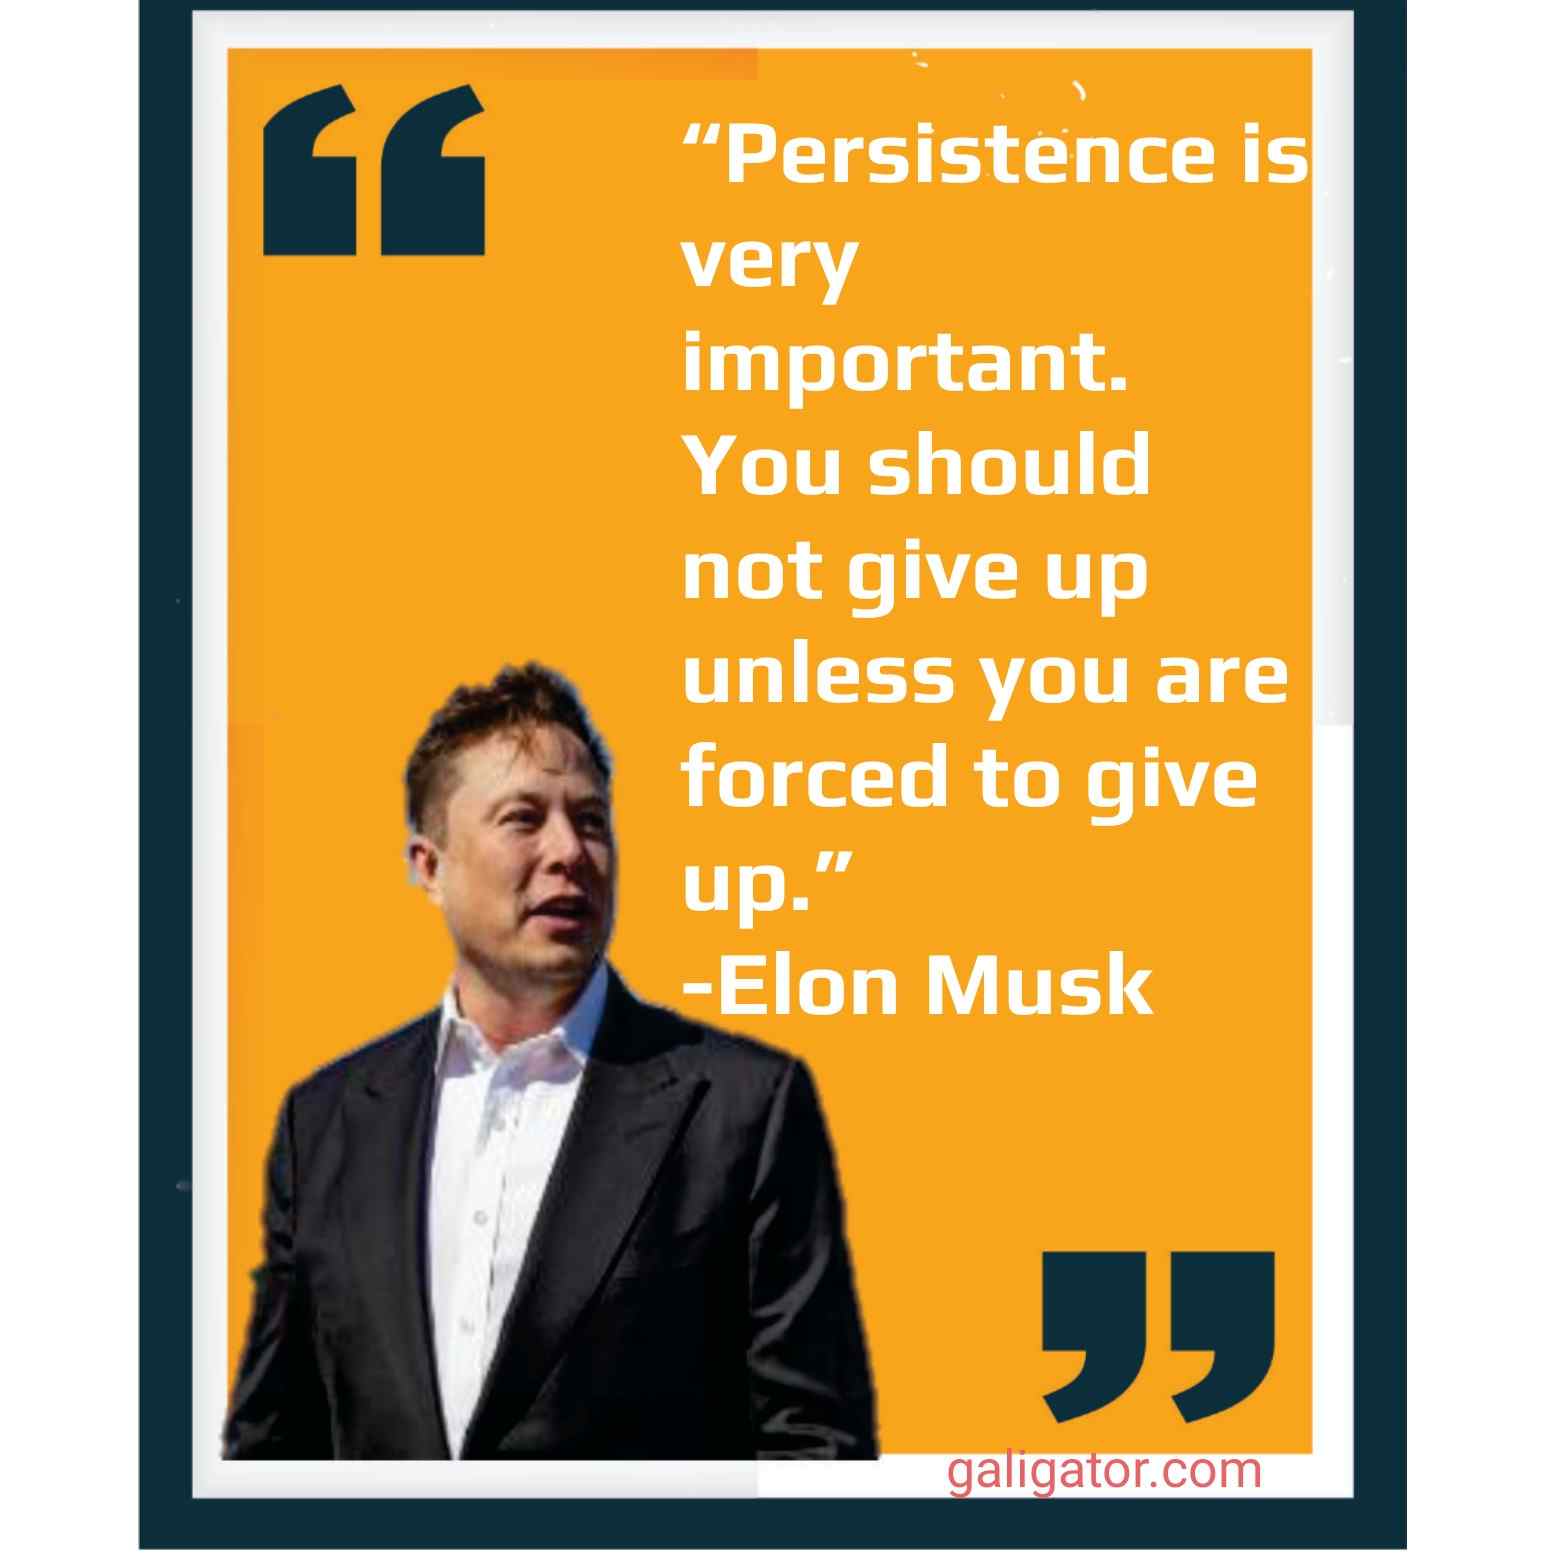 elon musk quotes in hindi ,  wallpaper elon musk quotes,  elon musk motivational quotes in hindi , elon musk quotes wallpaper, elon musk inspirational quotes,  thoughts of elon musk